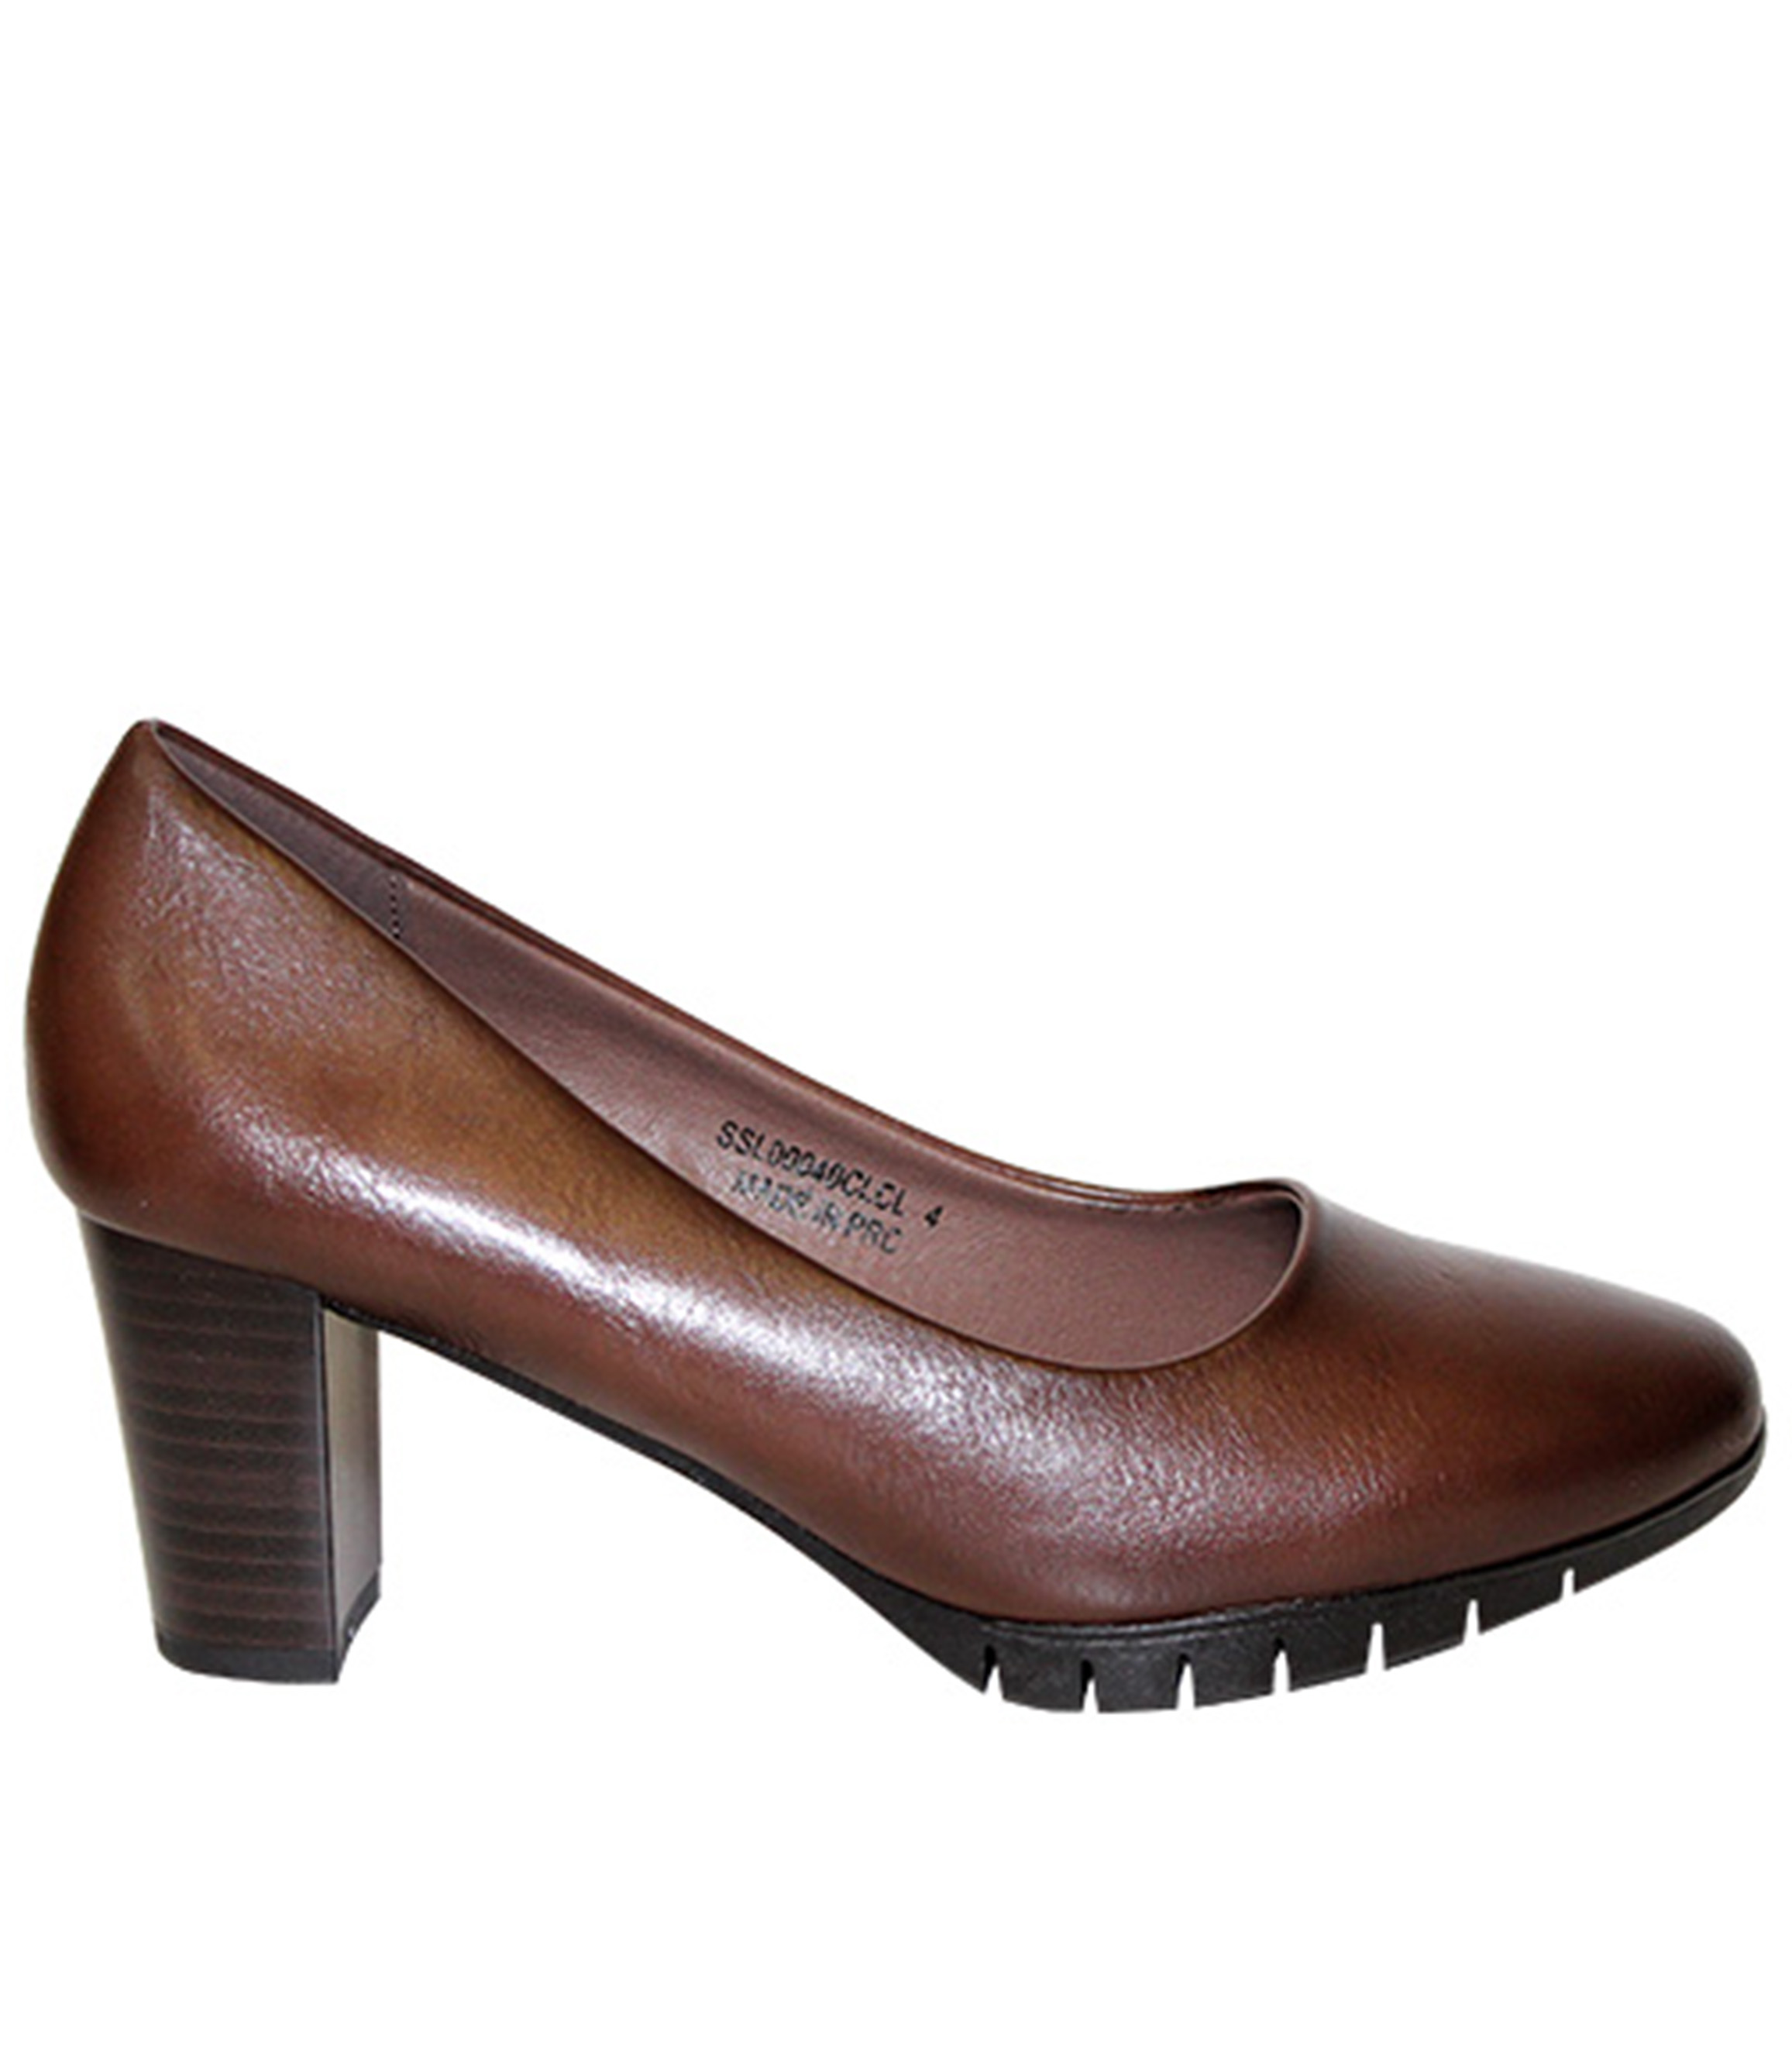 SOFT STYLE SIAN SHOE - CHOCOLATE | Rosella - Style inspired by elegance